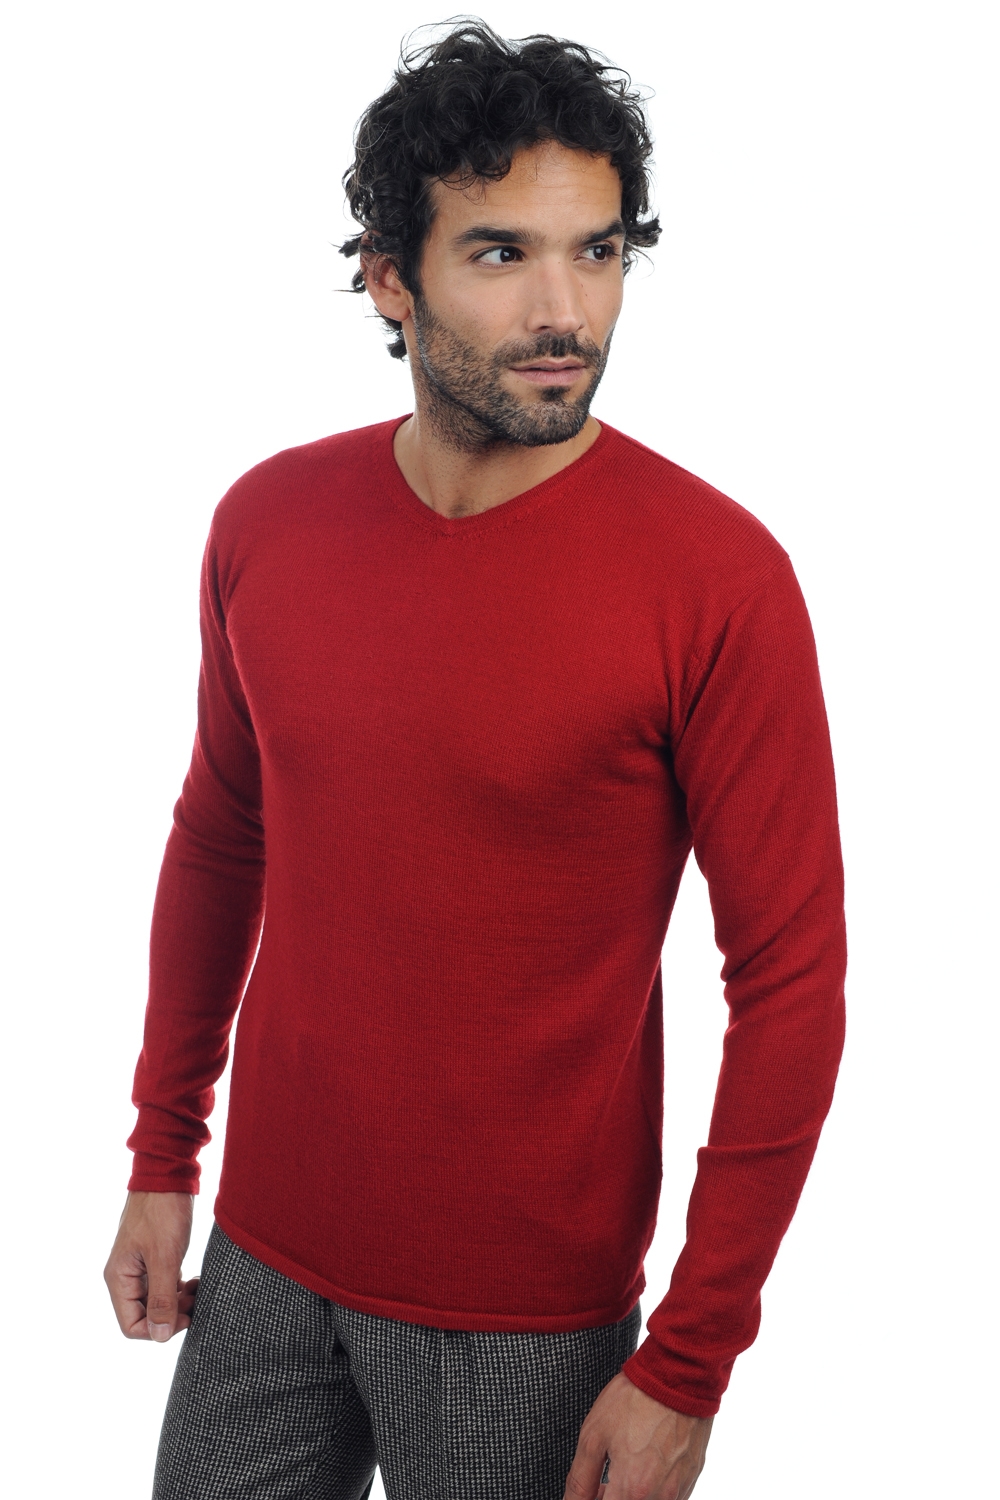 Baby Alpaga pull homme col v ethan rouge s